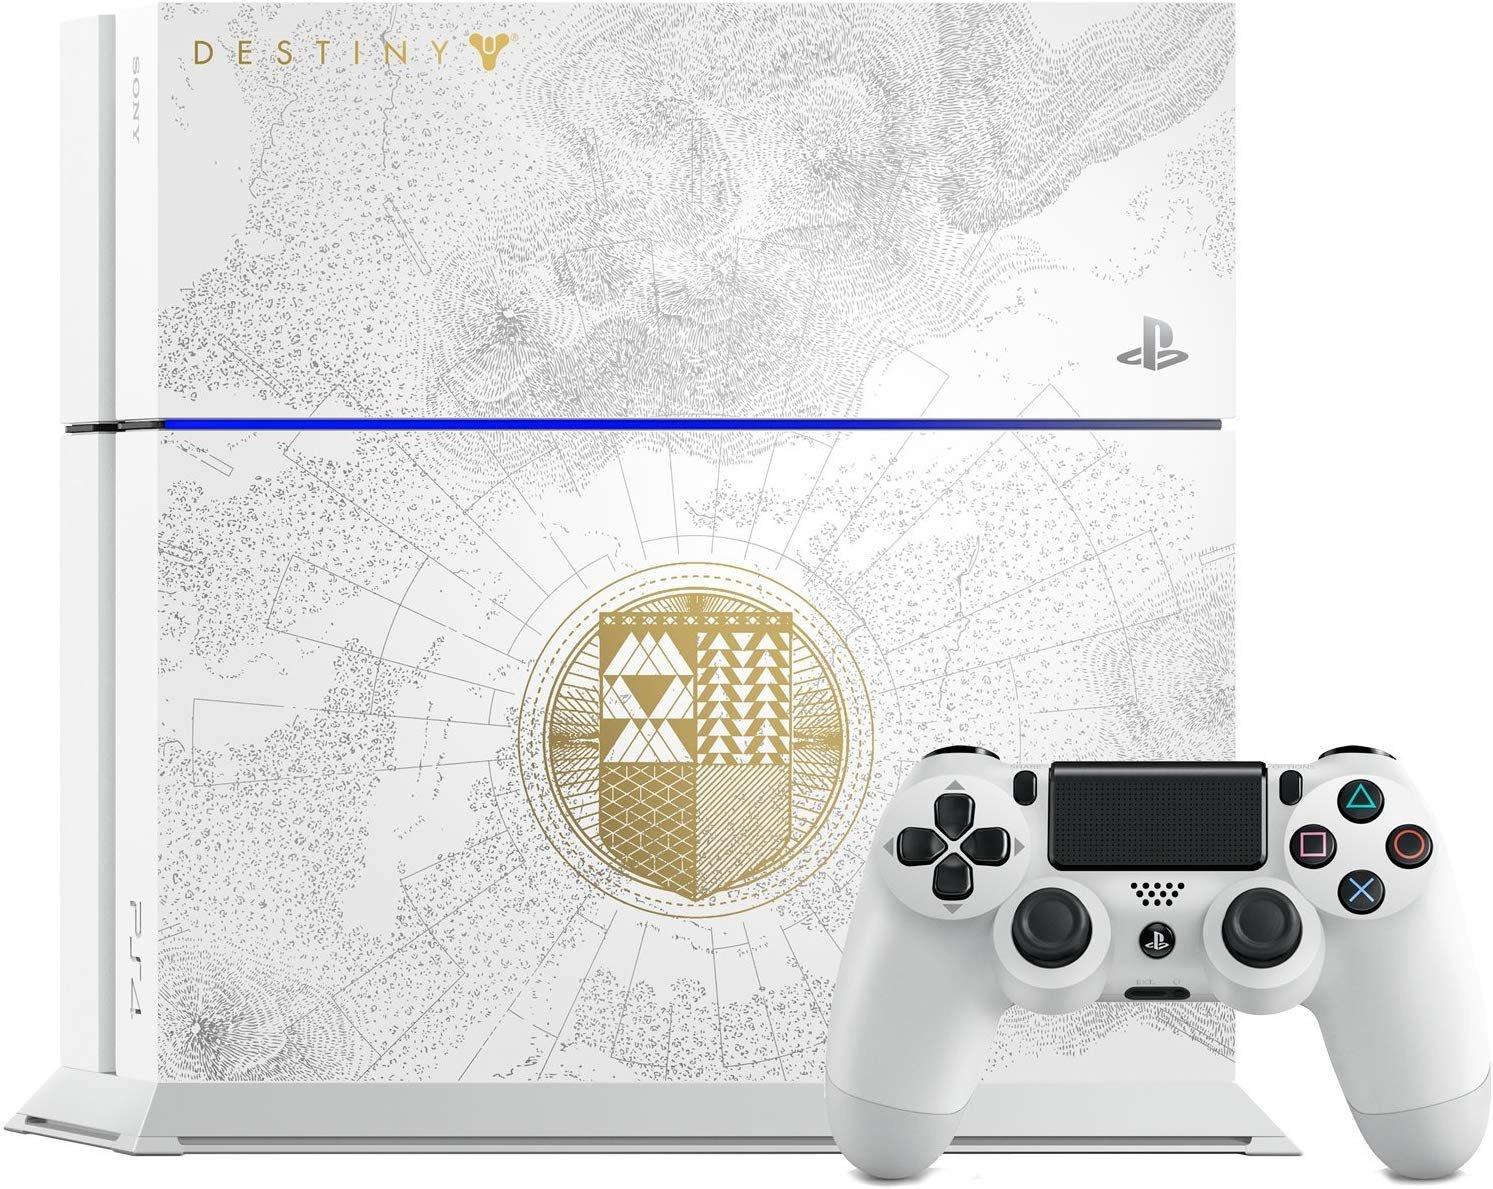 Sony PlayStation 4 500GB Console Destiny: The Taken King Limited Edition